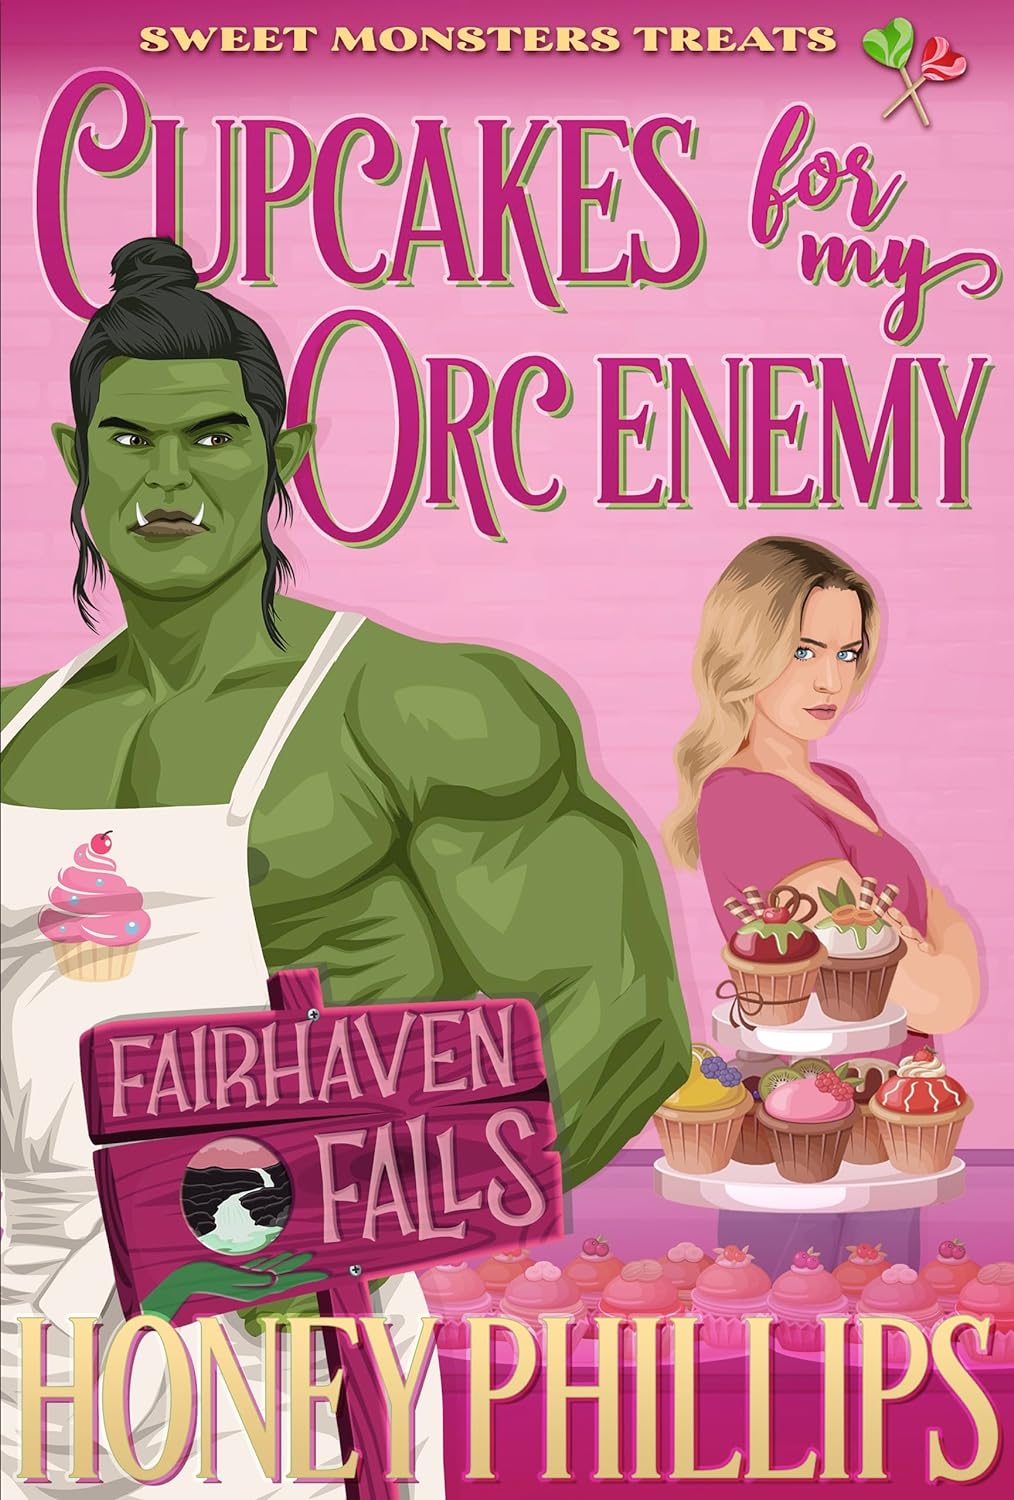 Cupcakes for My Orc Enemy by Honey Phillips